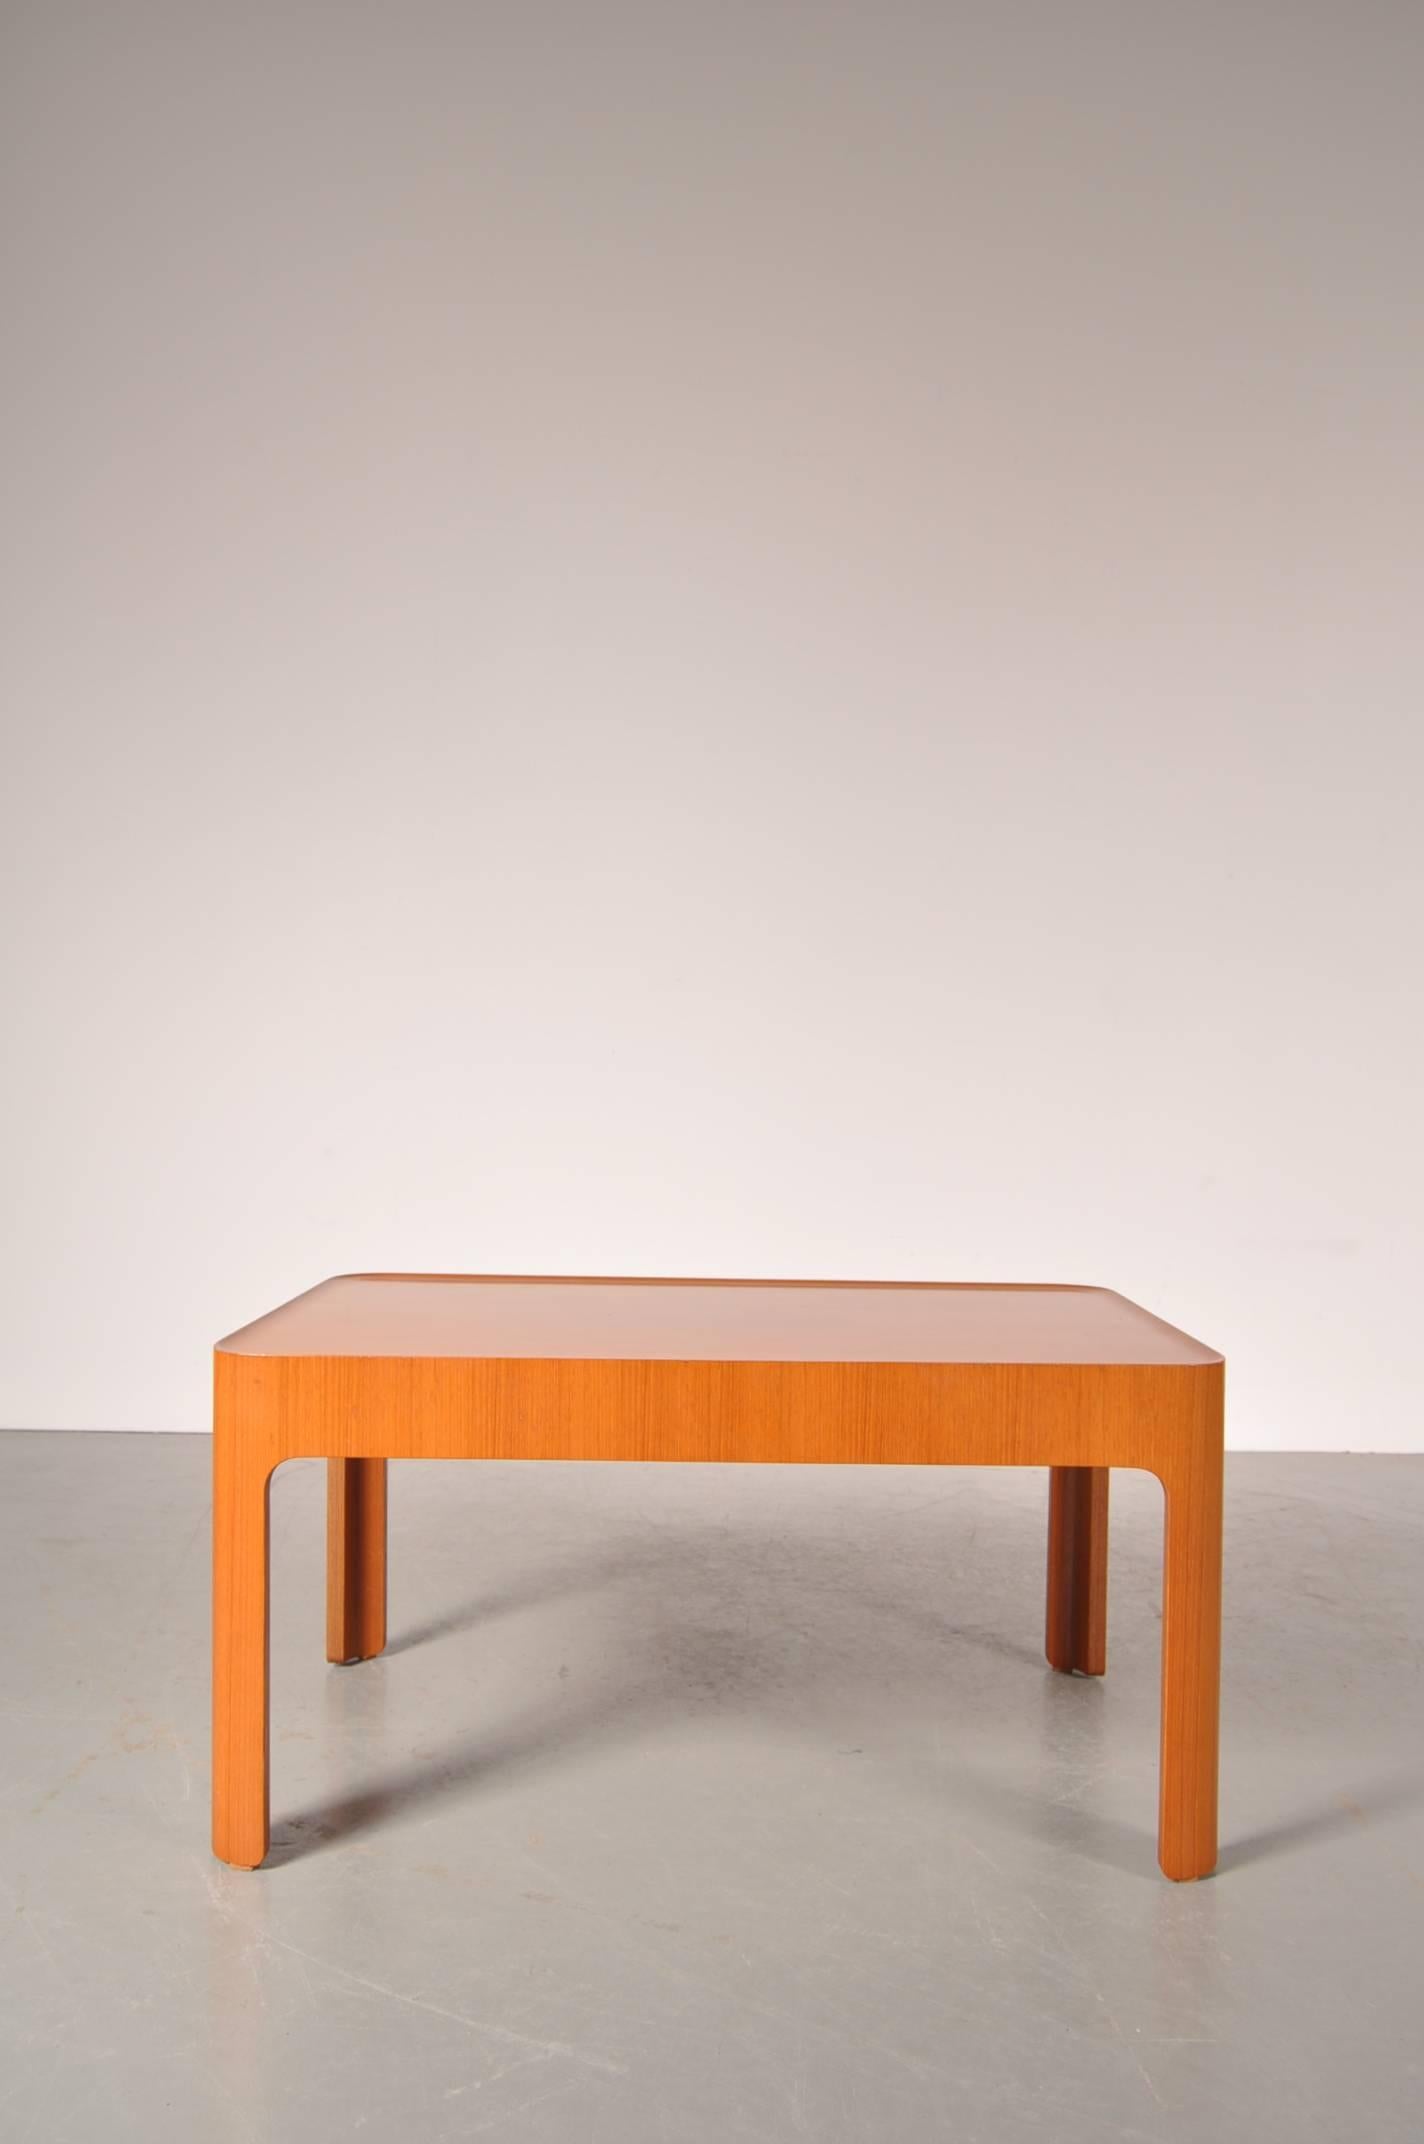 Beautiful coffee / side table designed by Isamu Kenmochi, manufactured by Tendo in Japan in 1967.

This eye-catching piece is made from high quality plywood. It is seamlessly crafted with a wonderful eye for detail. The four legs are bent to